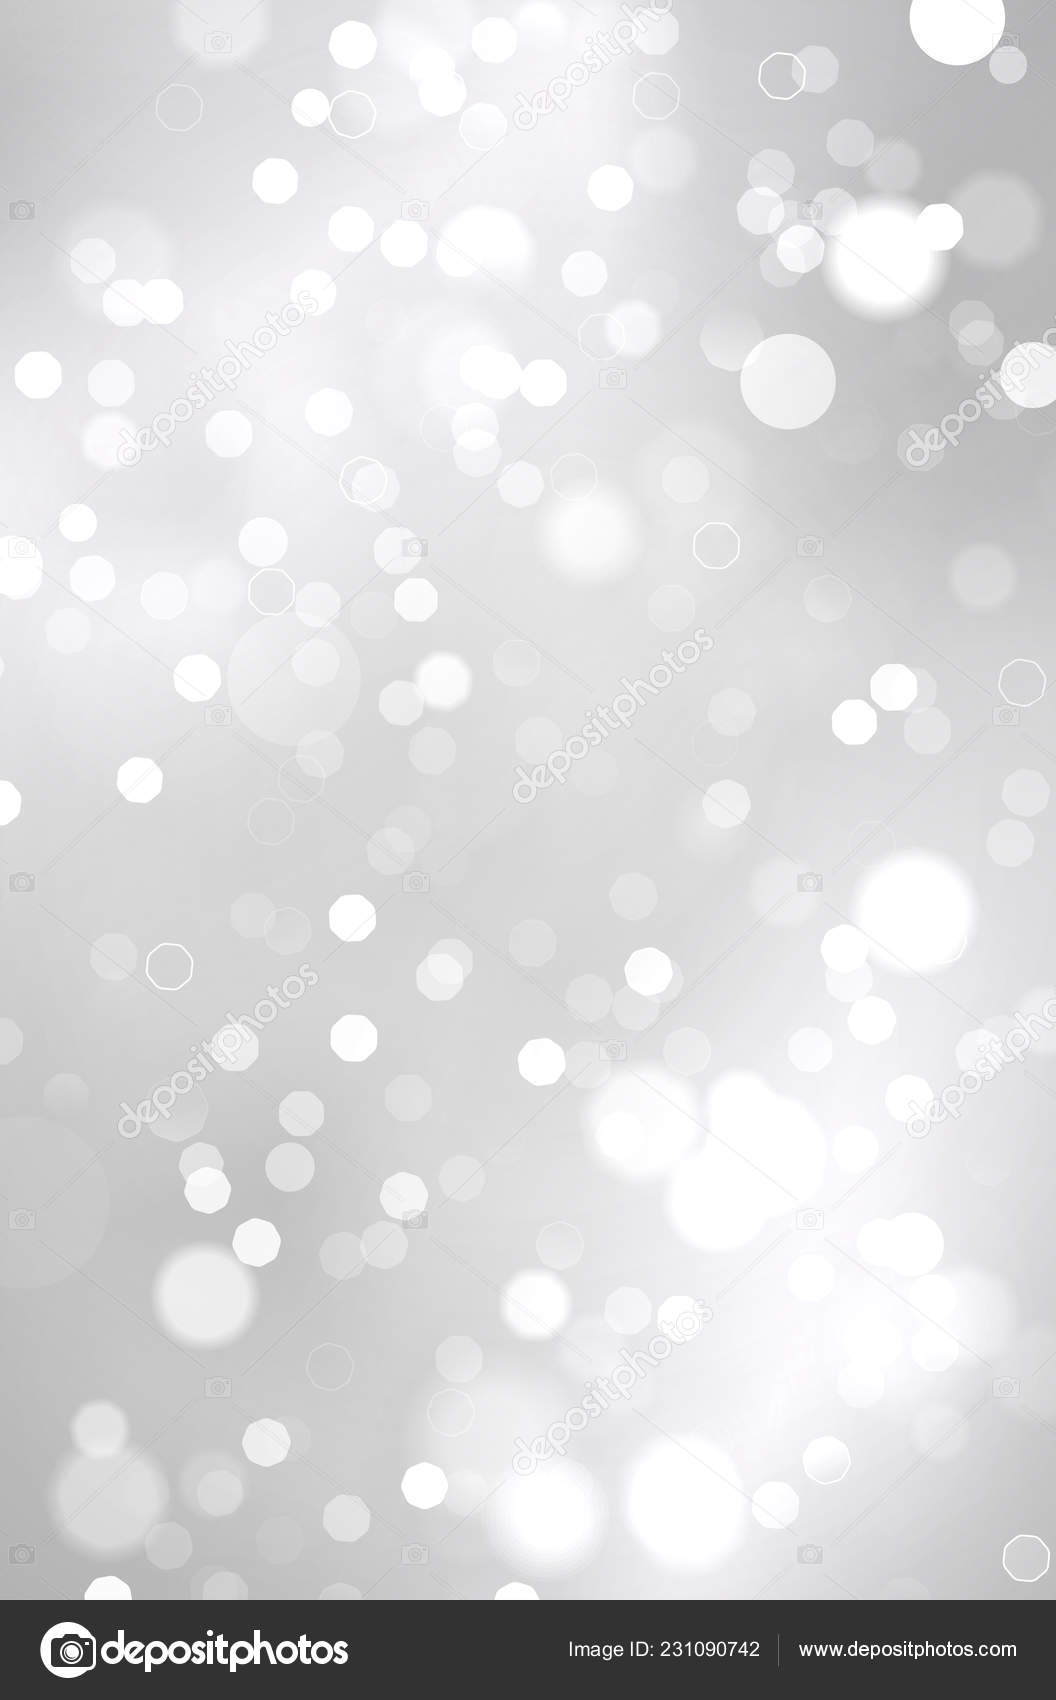 Abstract Shiny Silver Background Blurred Bokeh Lights Vector Illustration Vector Image By C Machacek Vector Stock